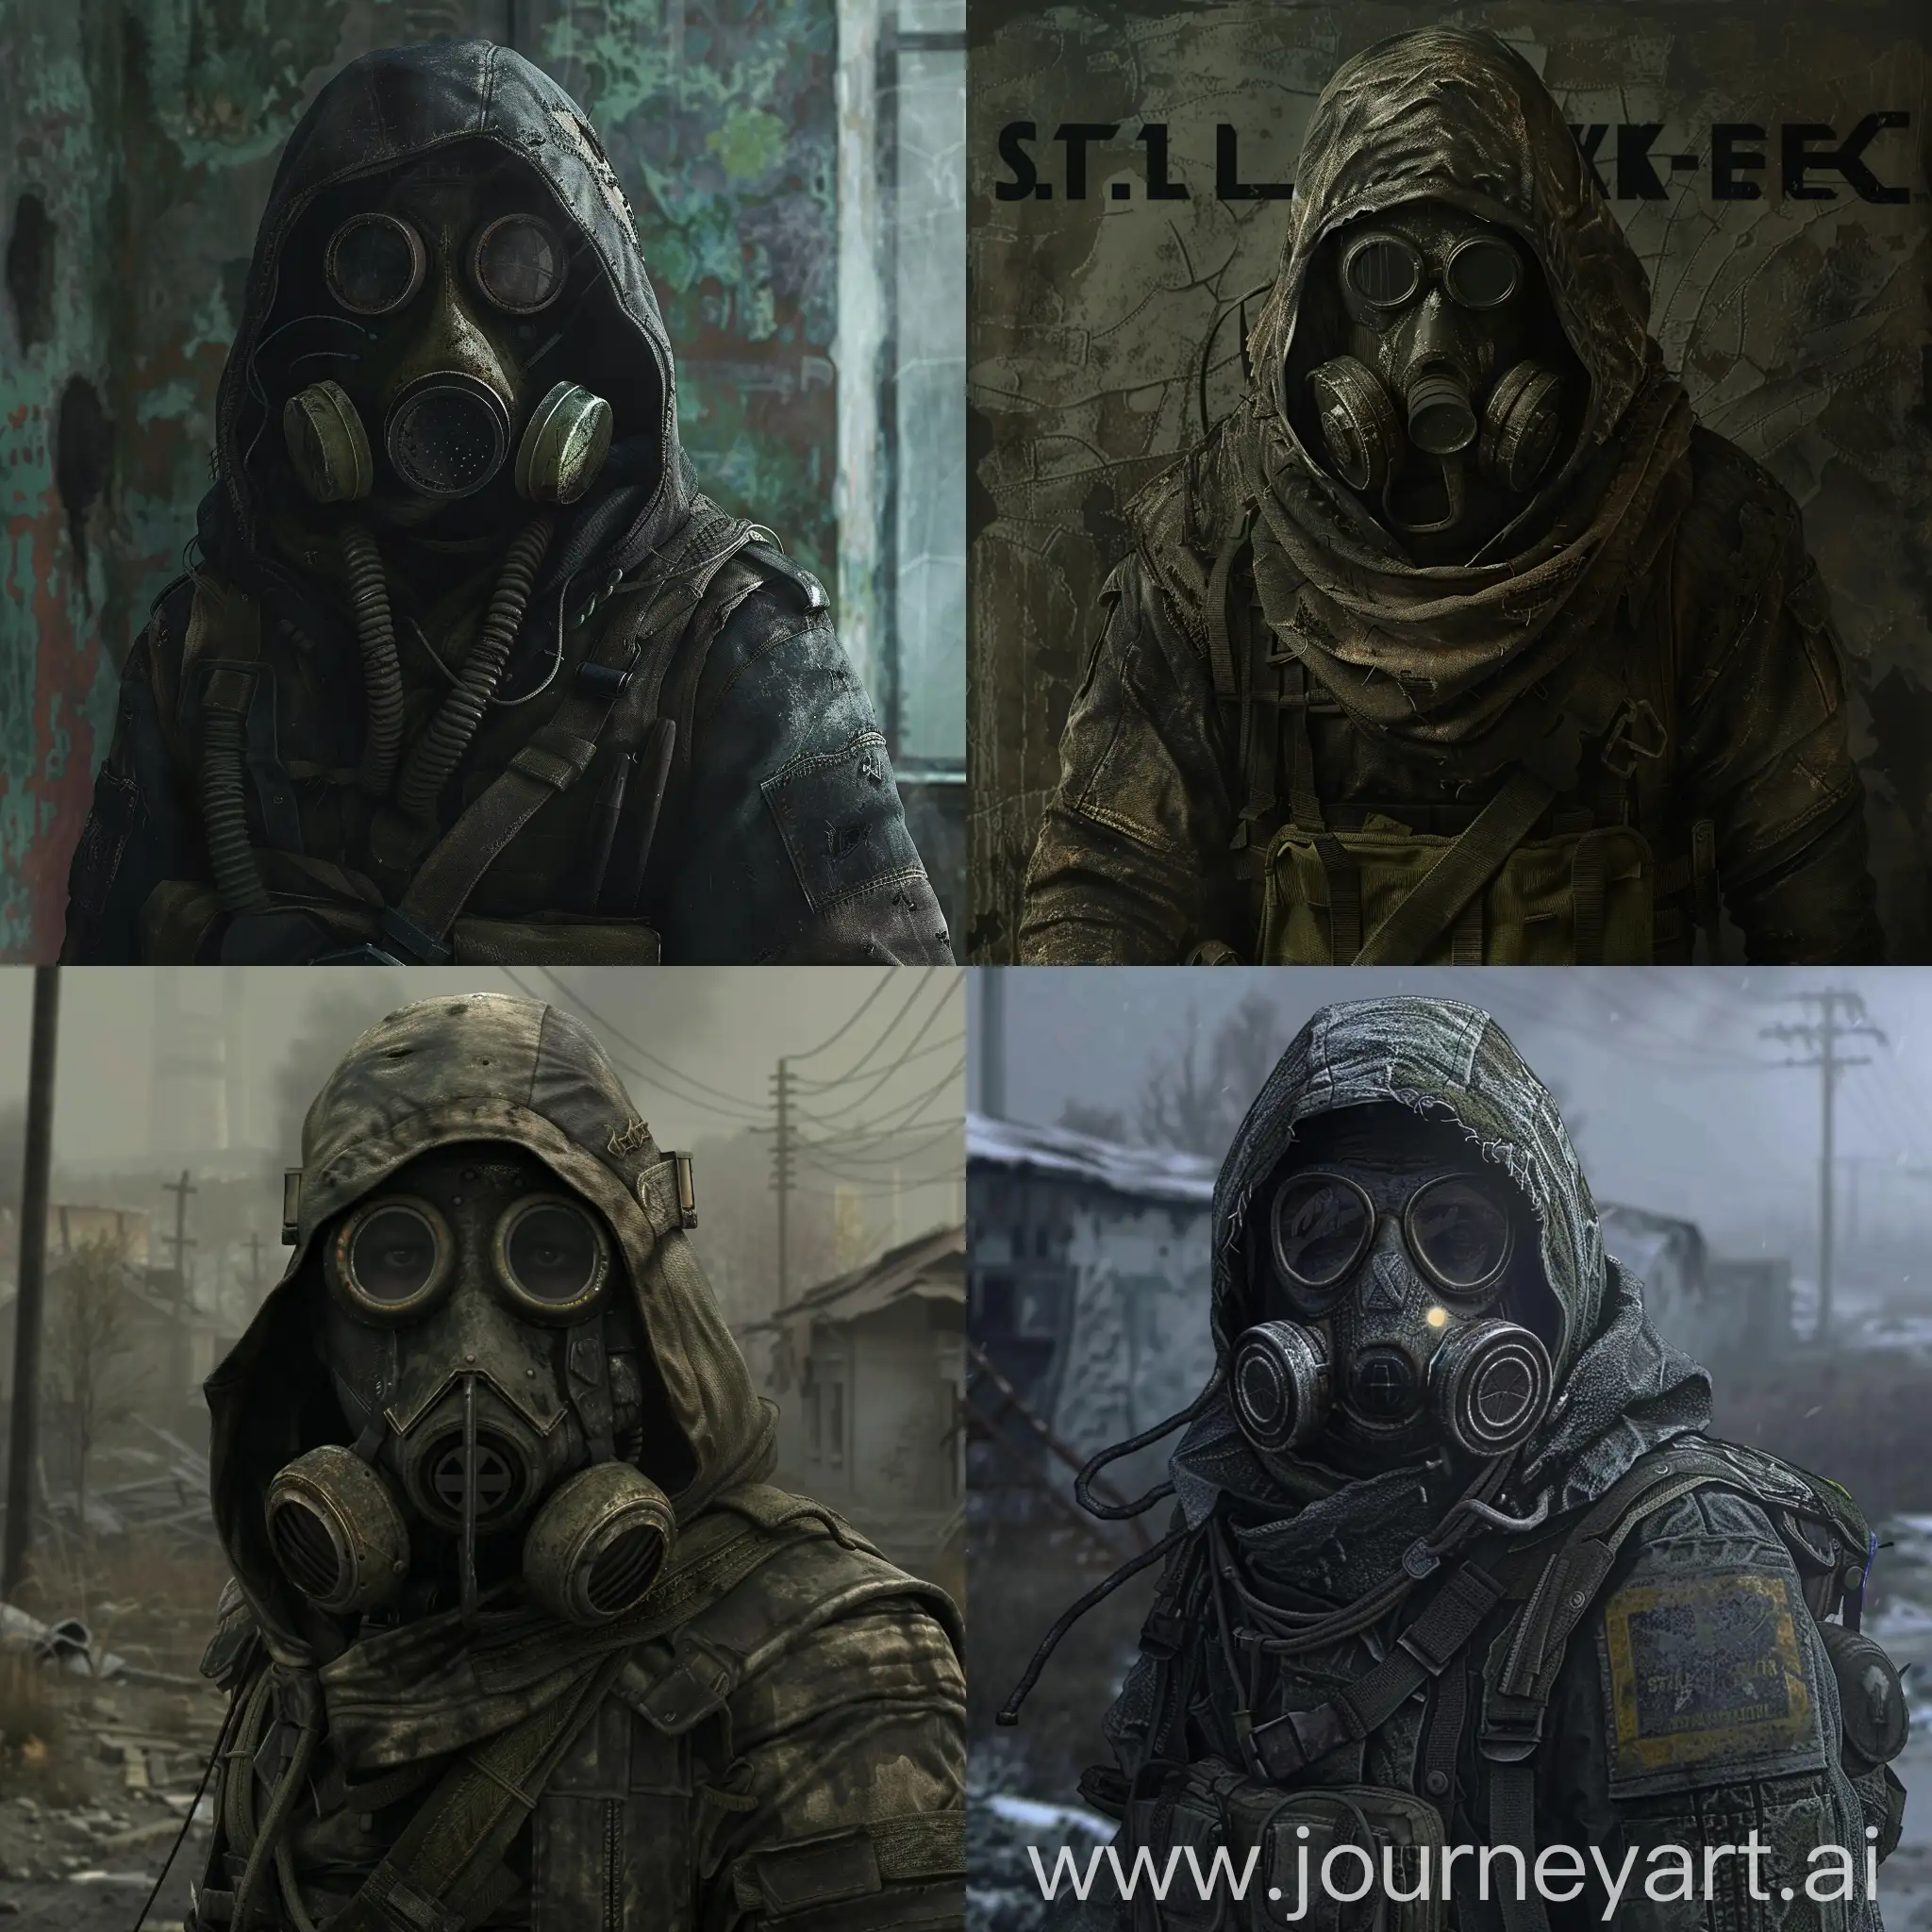 Make stalker newcomer from game S.T.A.L.K.E.R. Shadow of Chernobyl